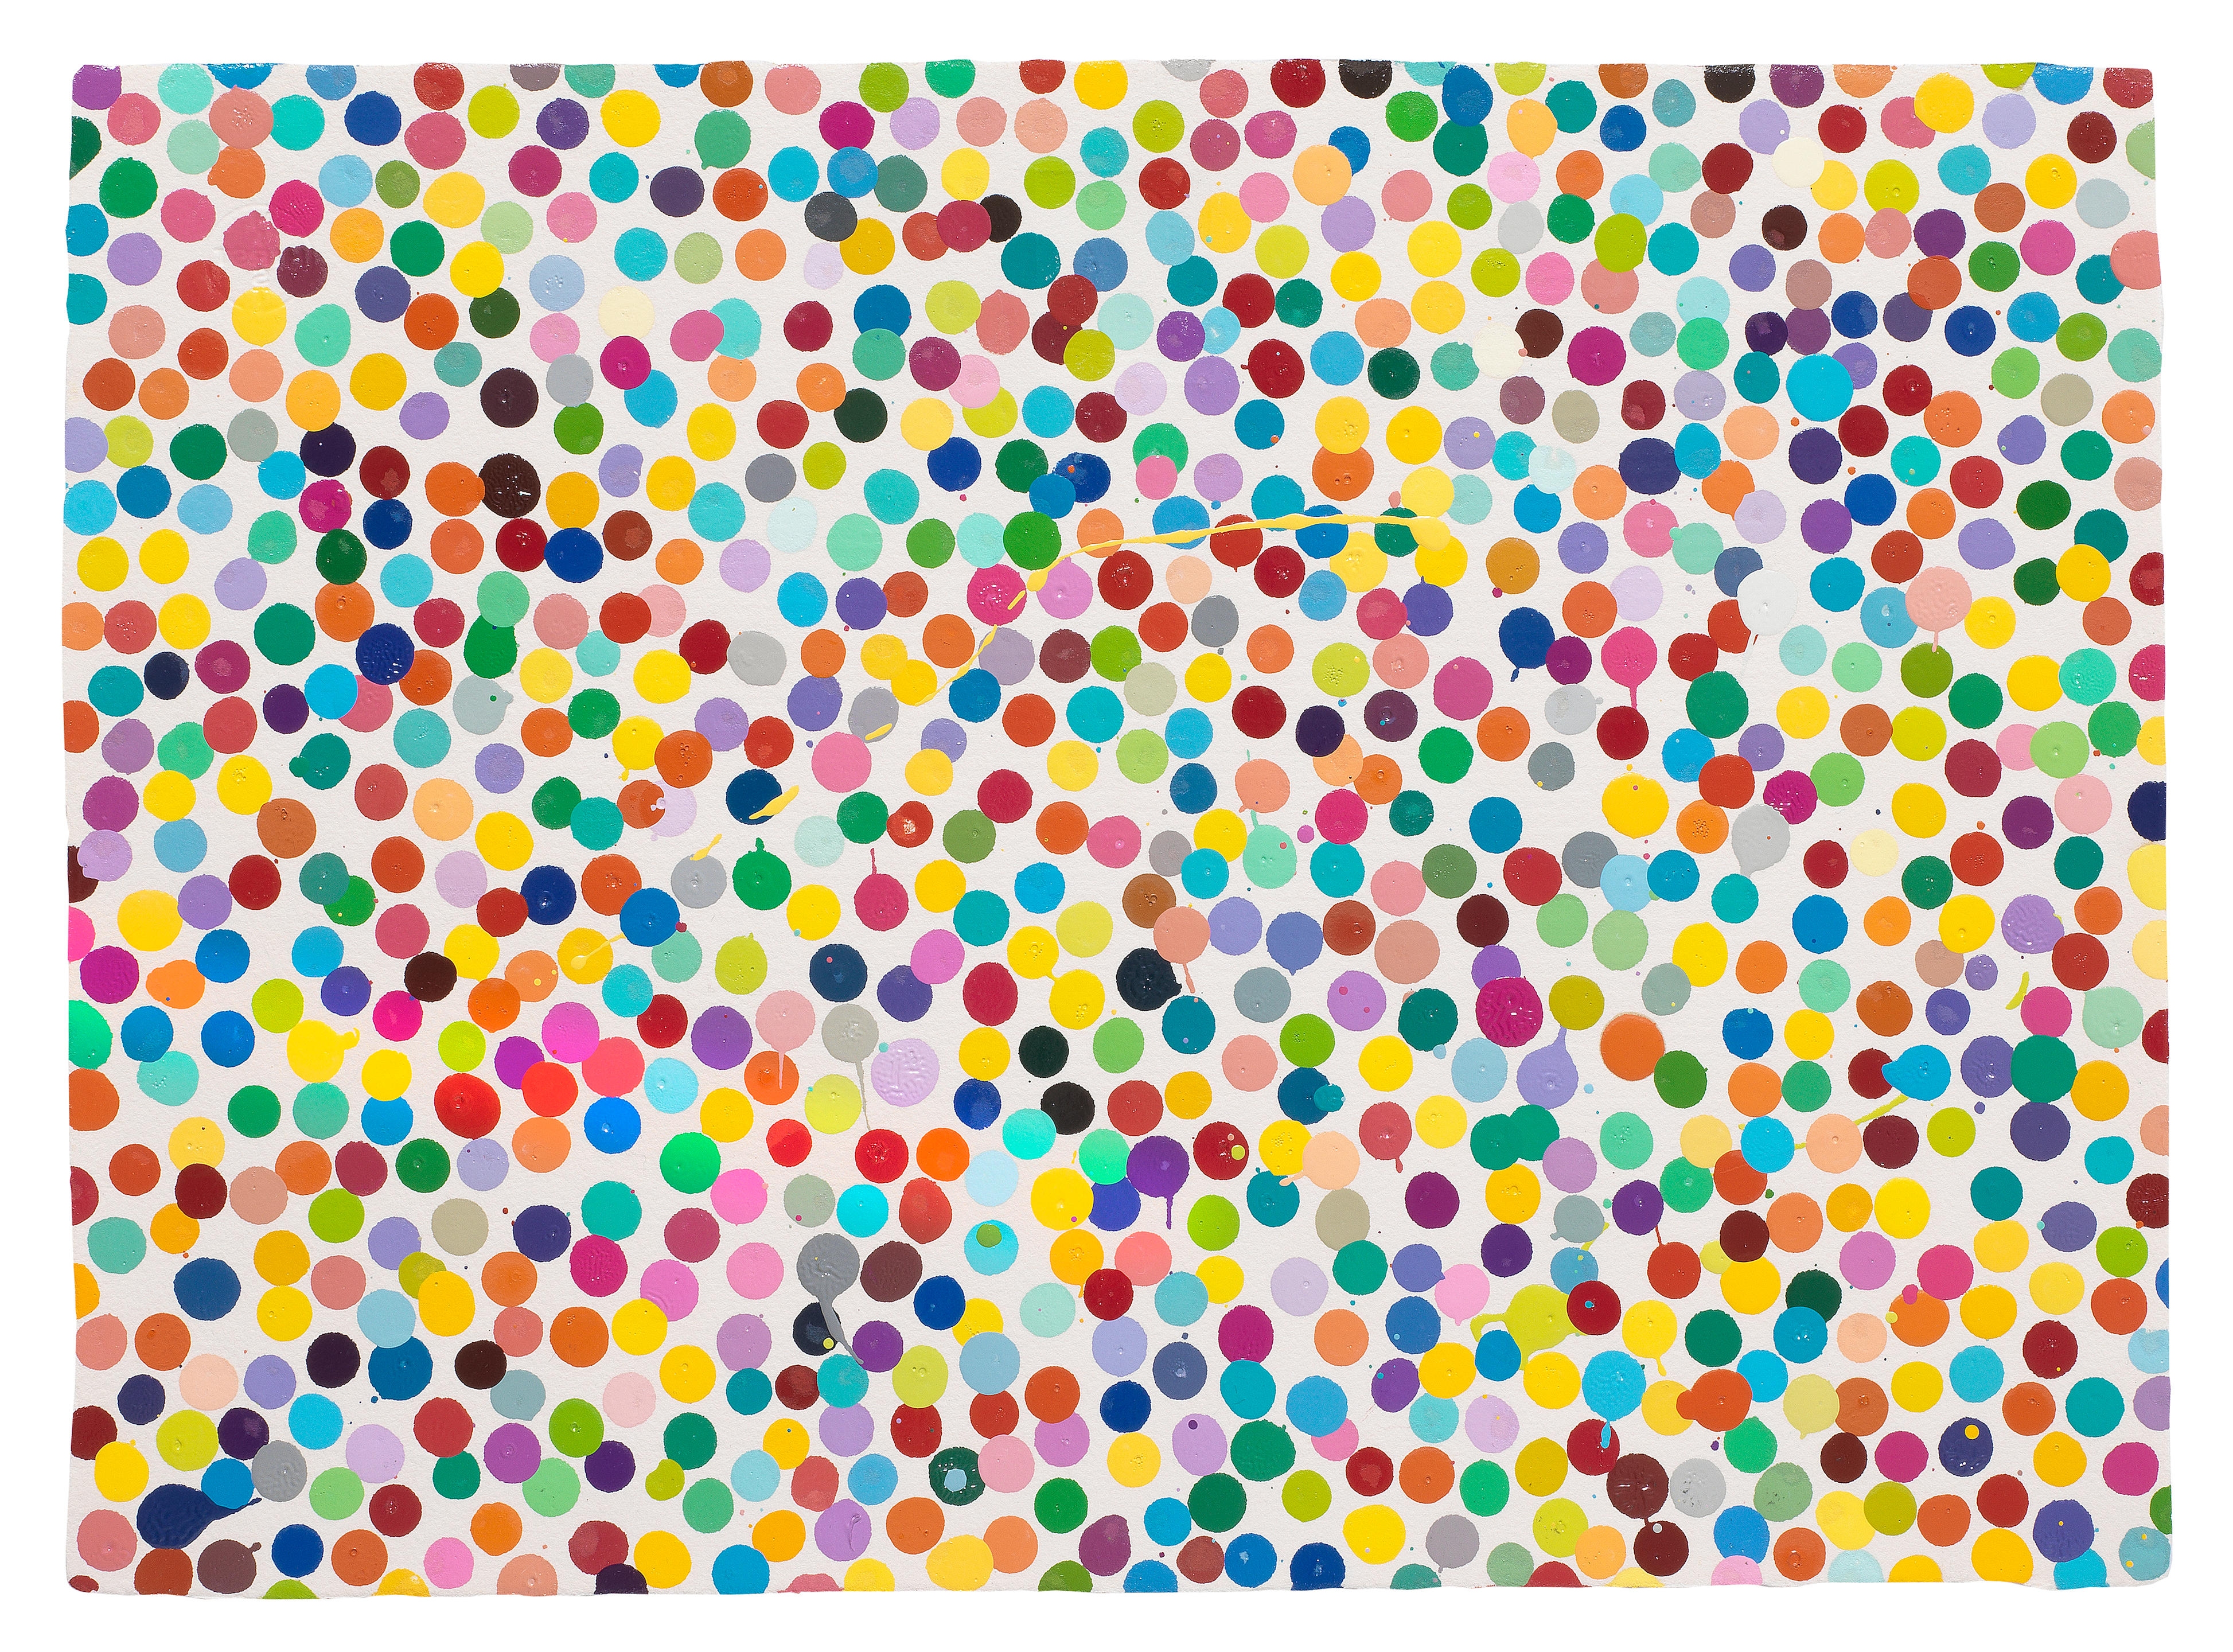 DAMIEN HIRST (B. 1965) 6350. Punch through every roulette wheel 2016